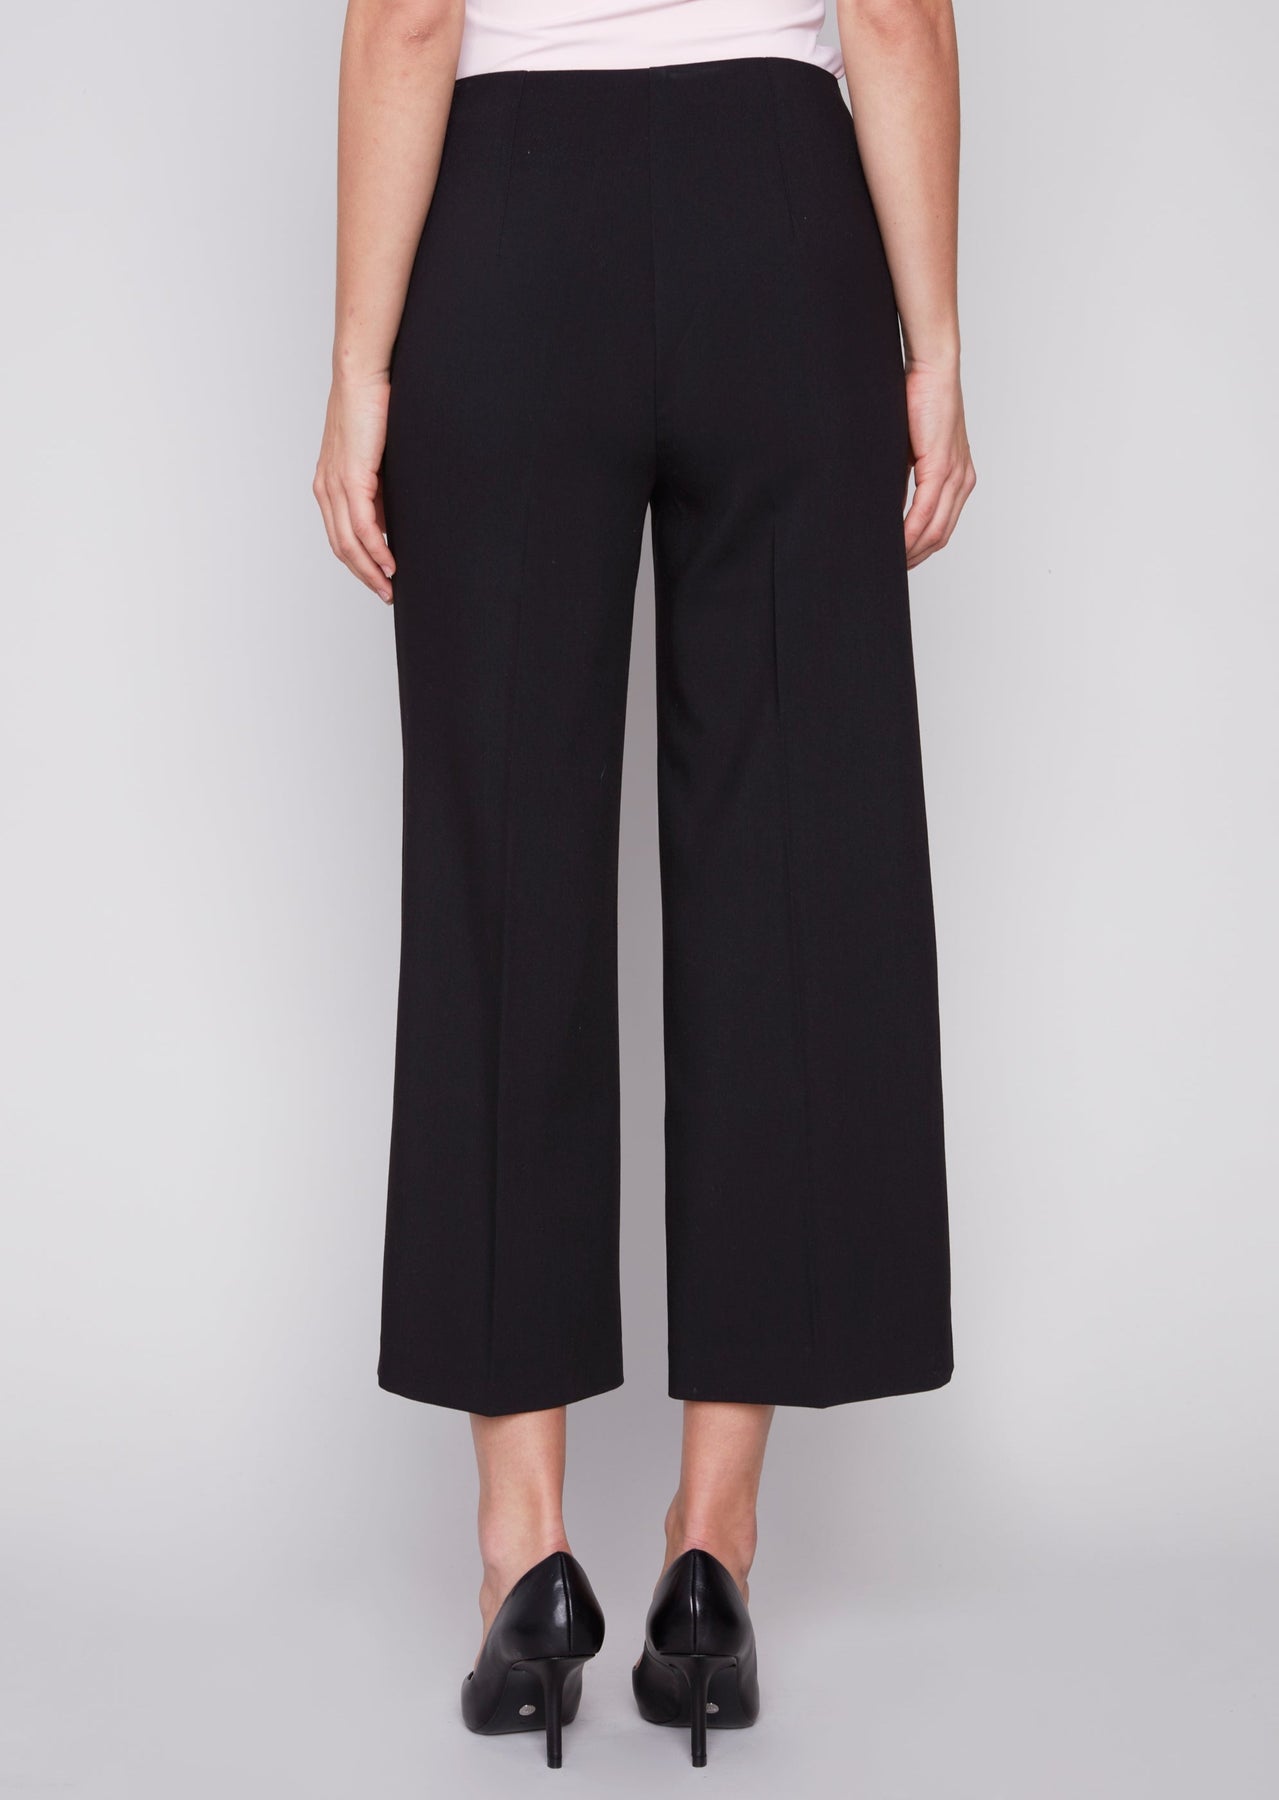 Pants With Size zipper and Wide Leg - Black